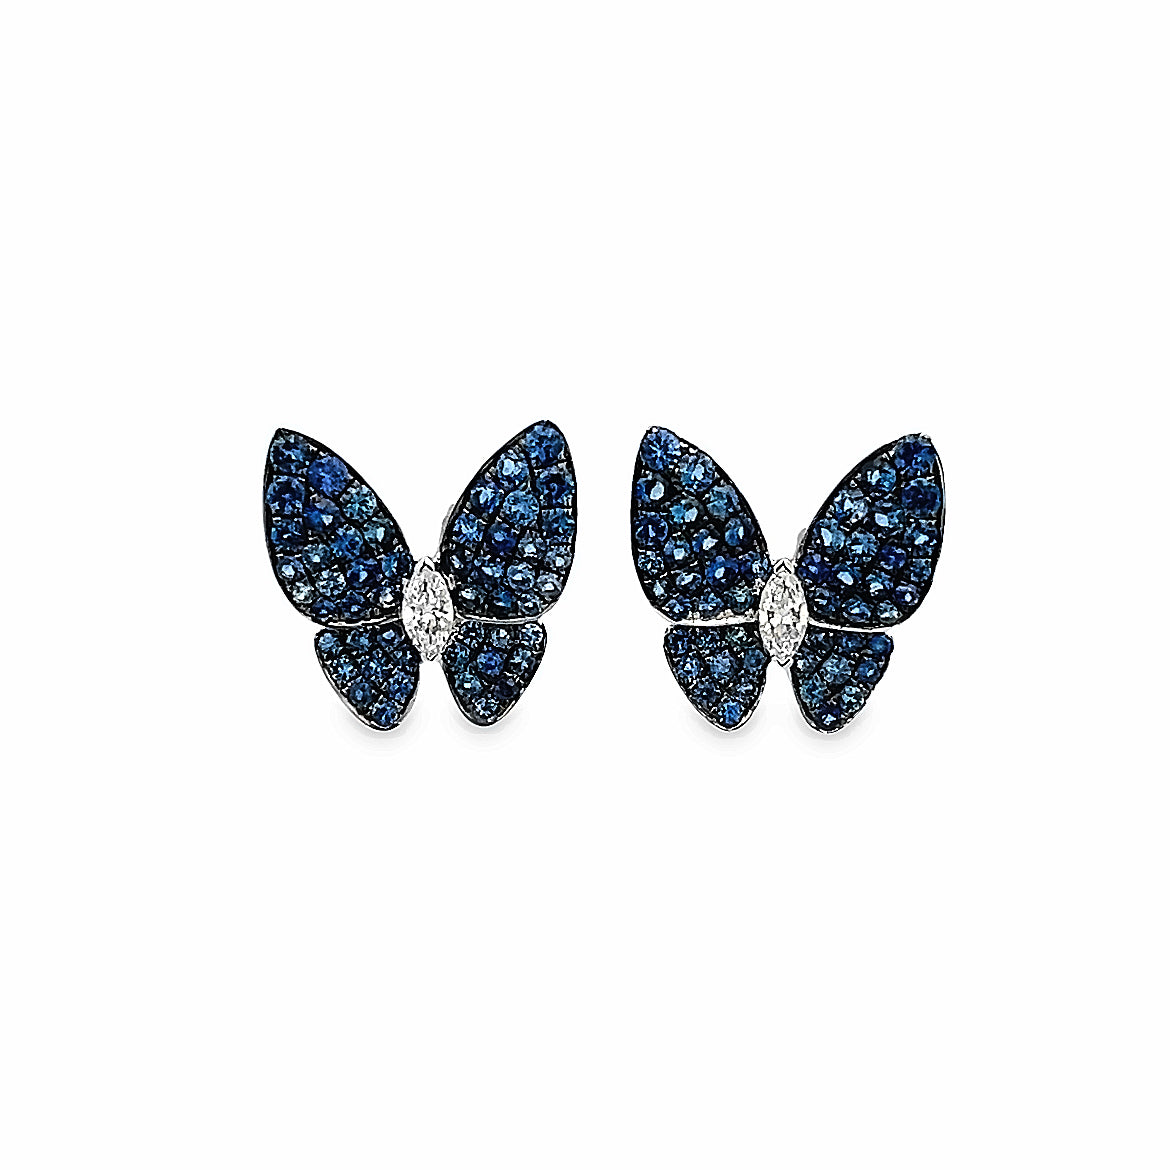 18K WHITE GOLD BUTTERFLY EARRINGS WITH BLUE SAPPHIRE